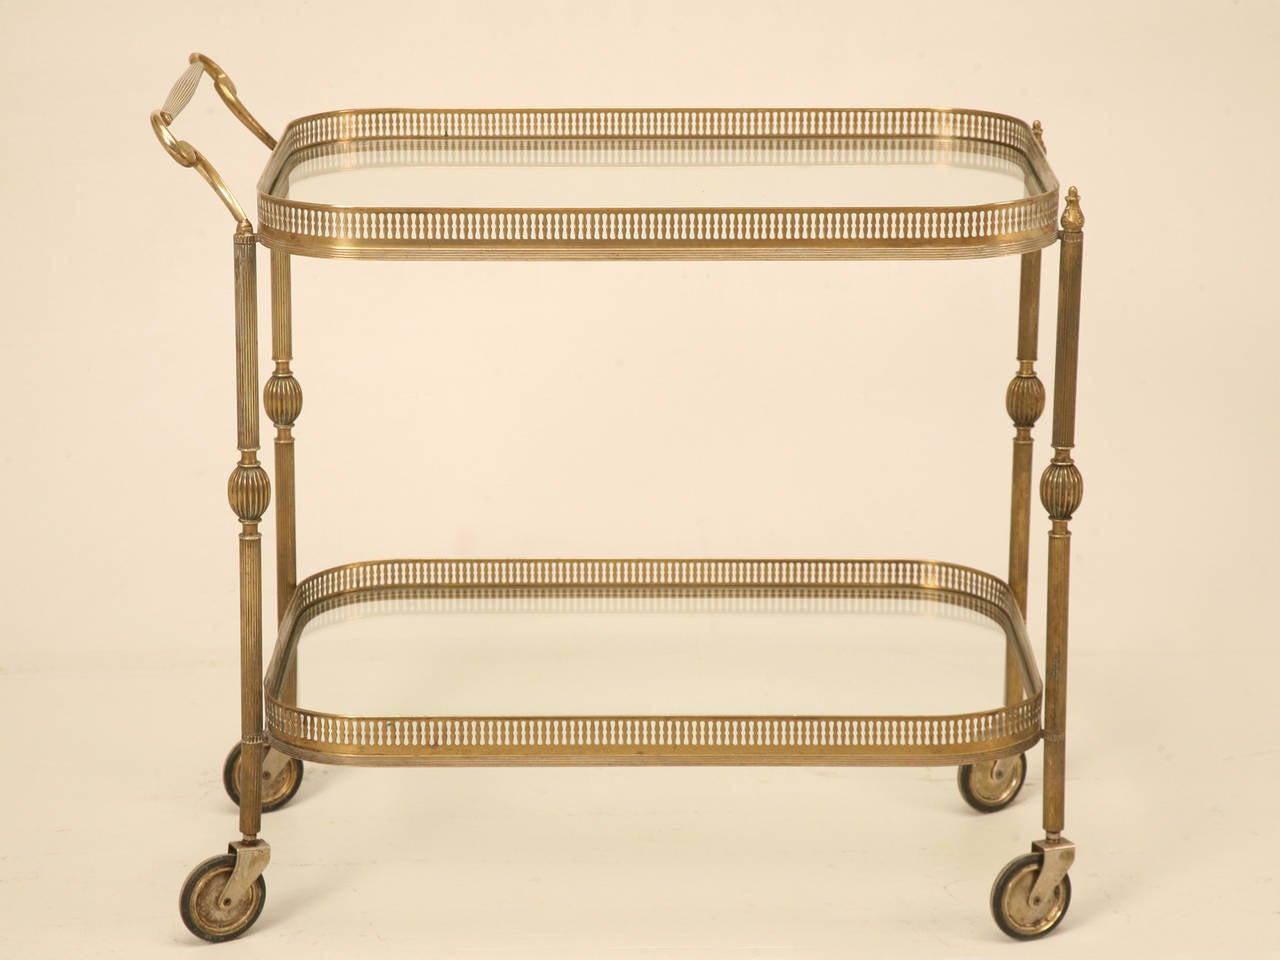 French vintage brass tea cart that has the look and weight of bronze, and if the seller had not told he thought it was brass, I would have sworn it was bronze. Either way, it has a lovely aged rich look without appearing to require a polishing,